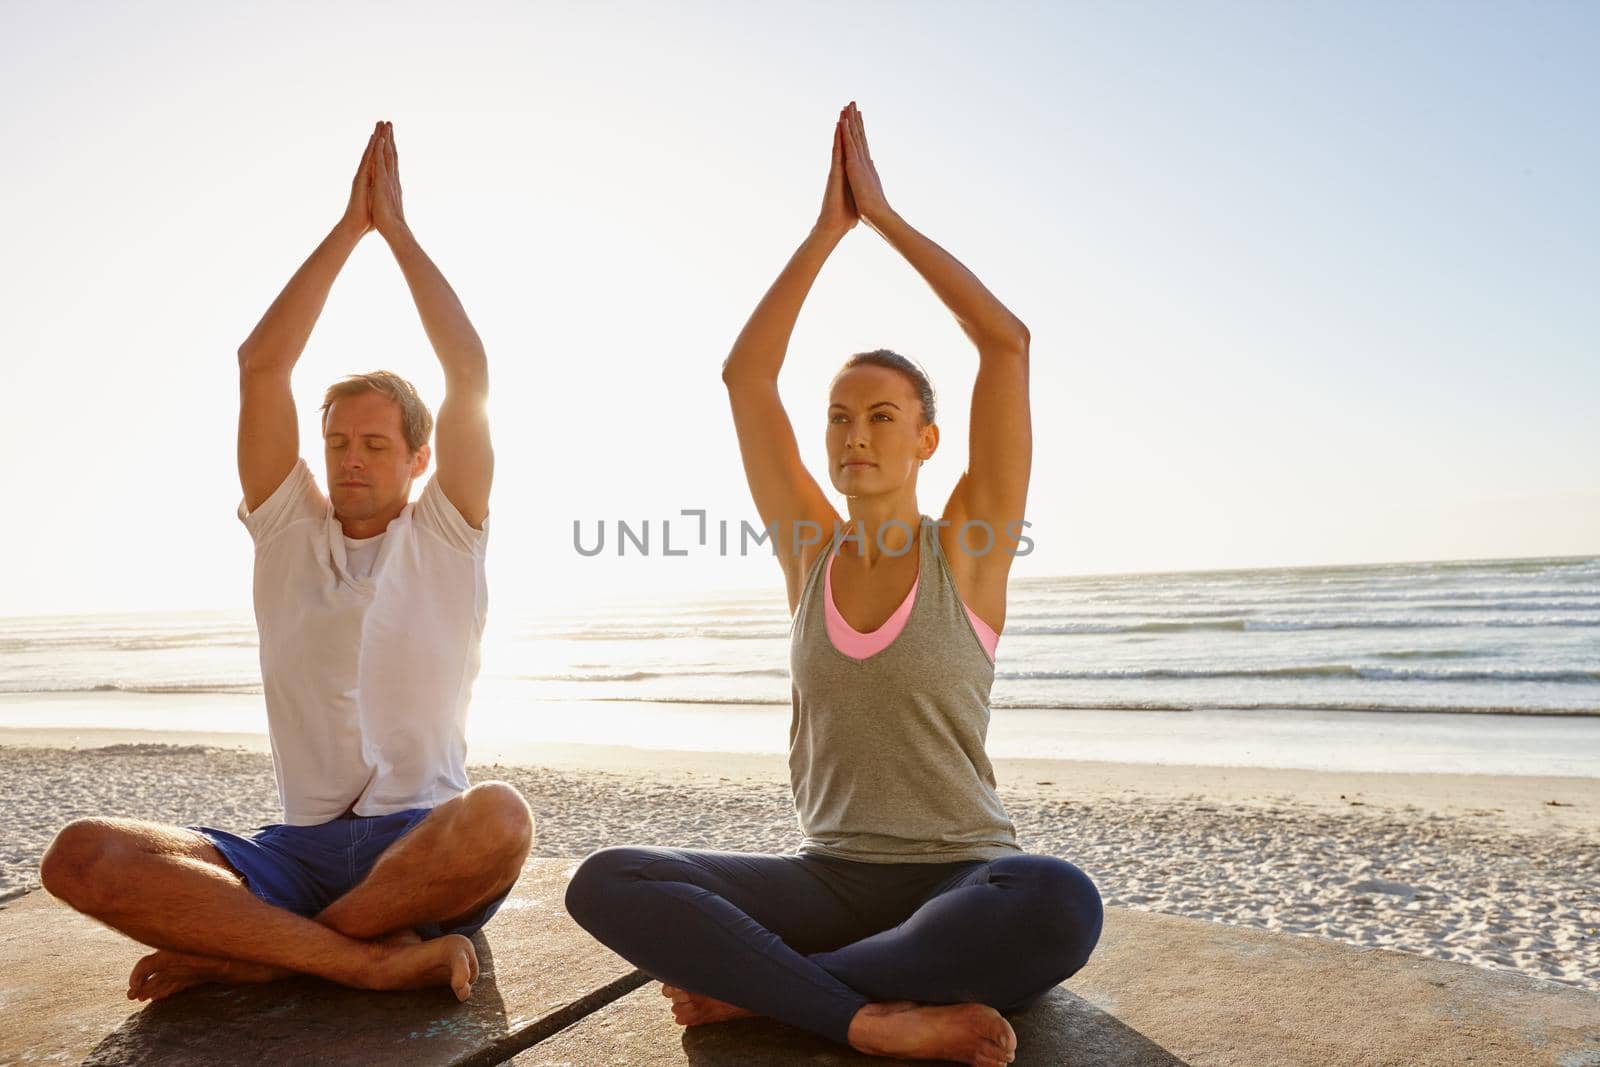 Shot of a couple doing yoga at the beach at sunset.